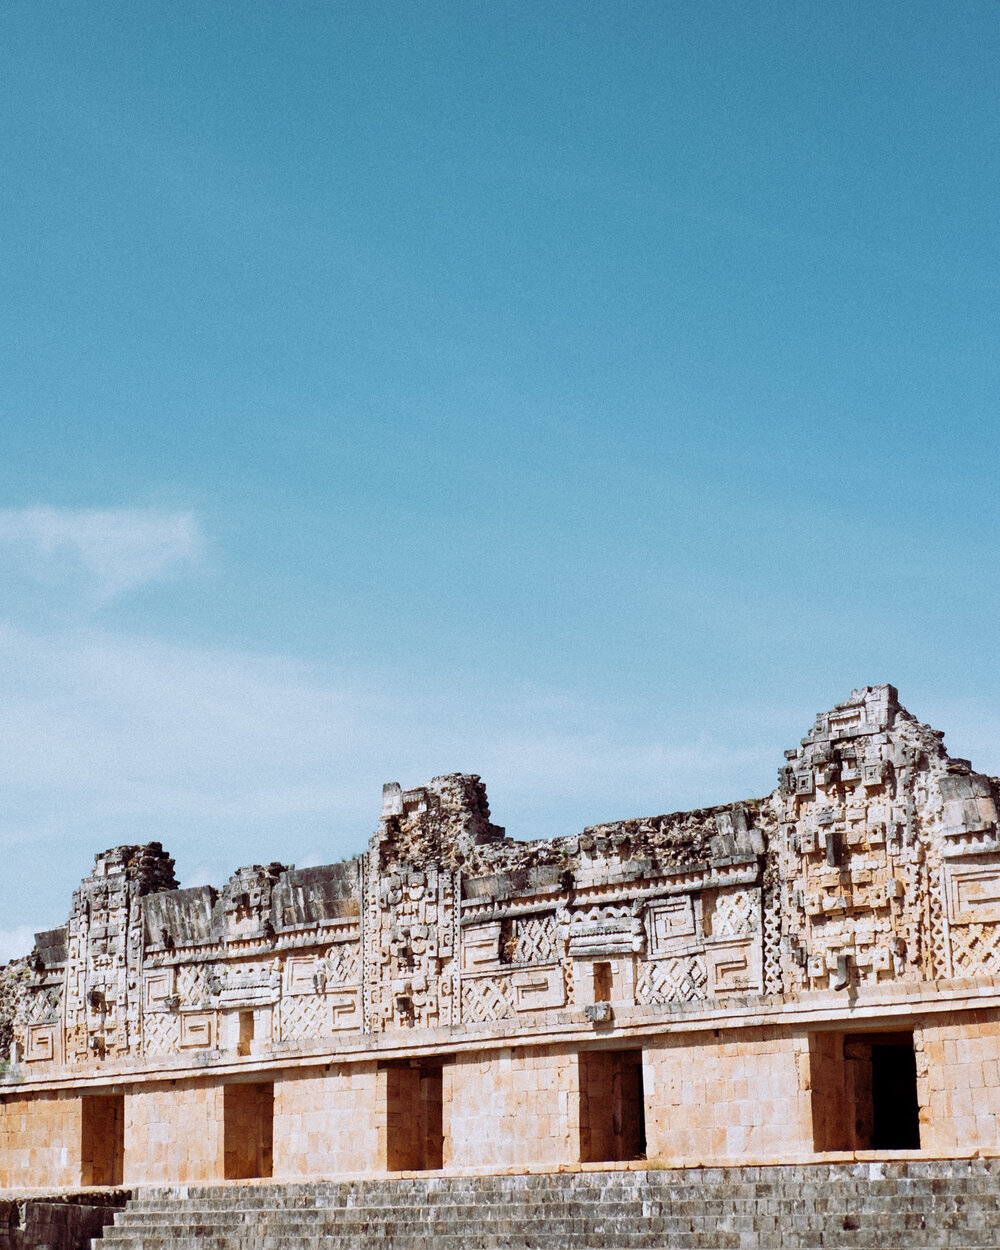 Rachel Off Duty: The Intricate Details of Uxmal's Ruins